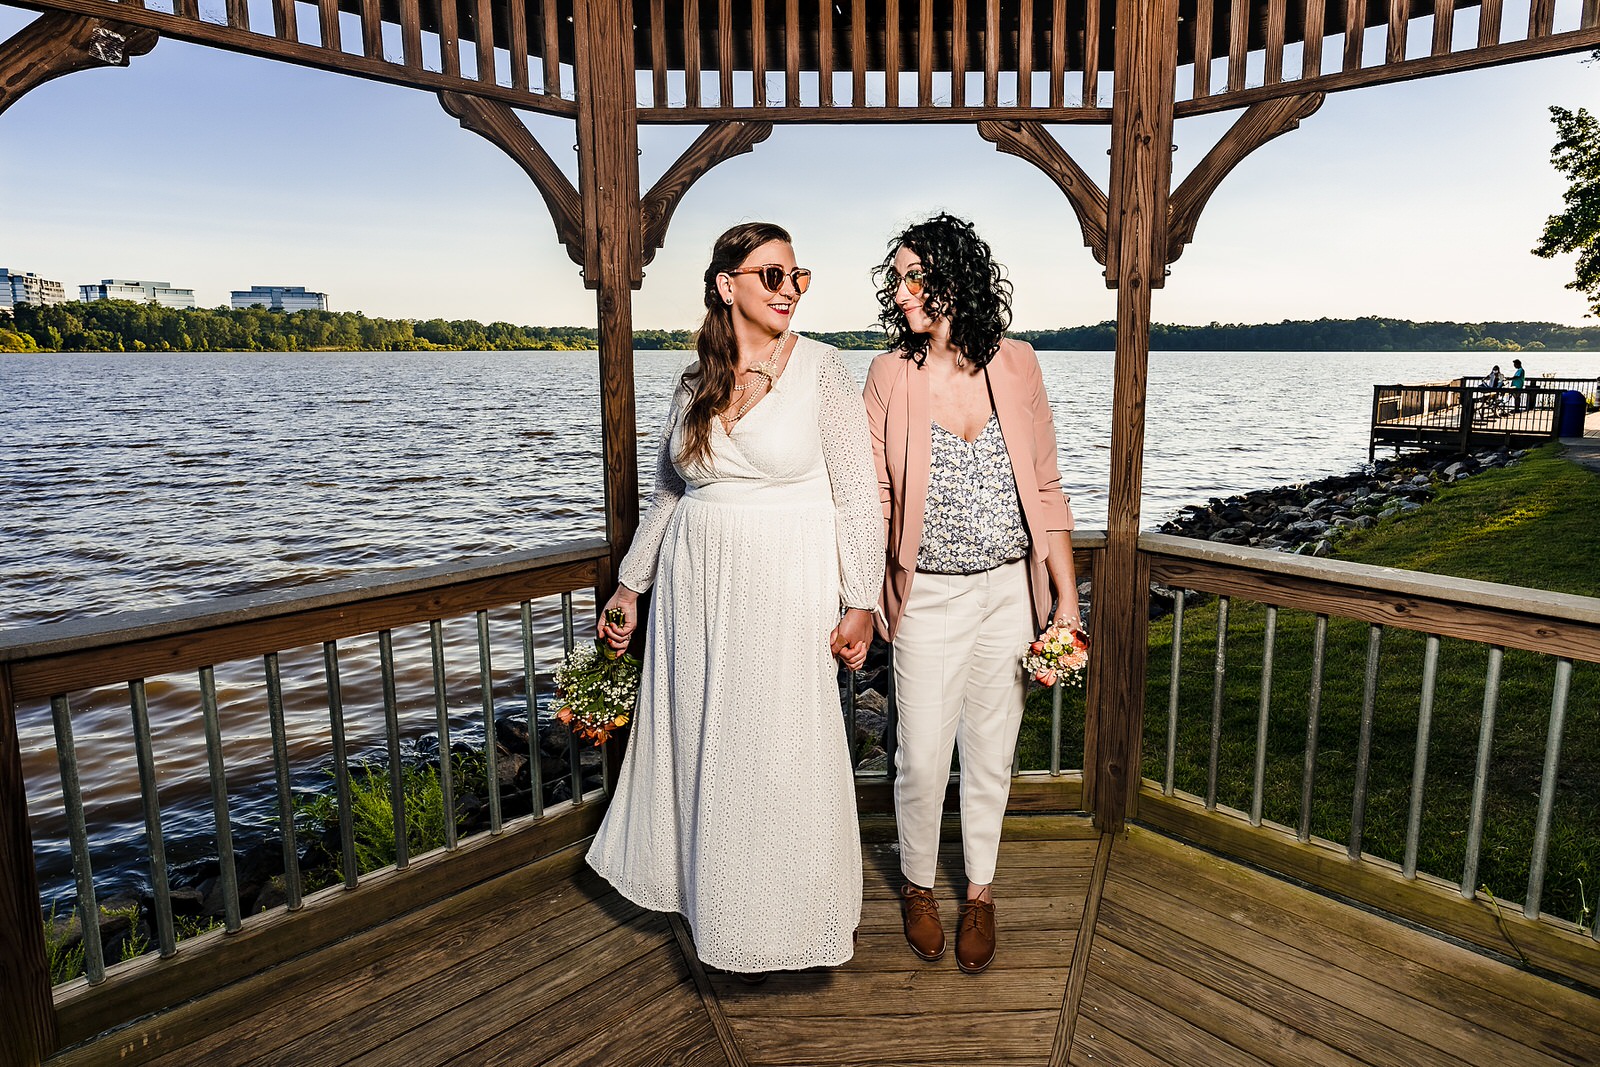 Two brides strike a fun pose at their same-sex elopement in Raleigh, NC